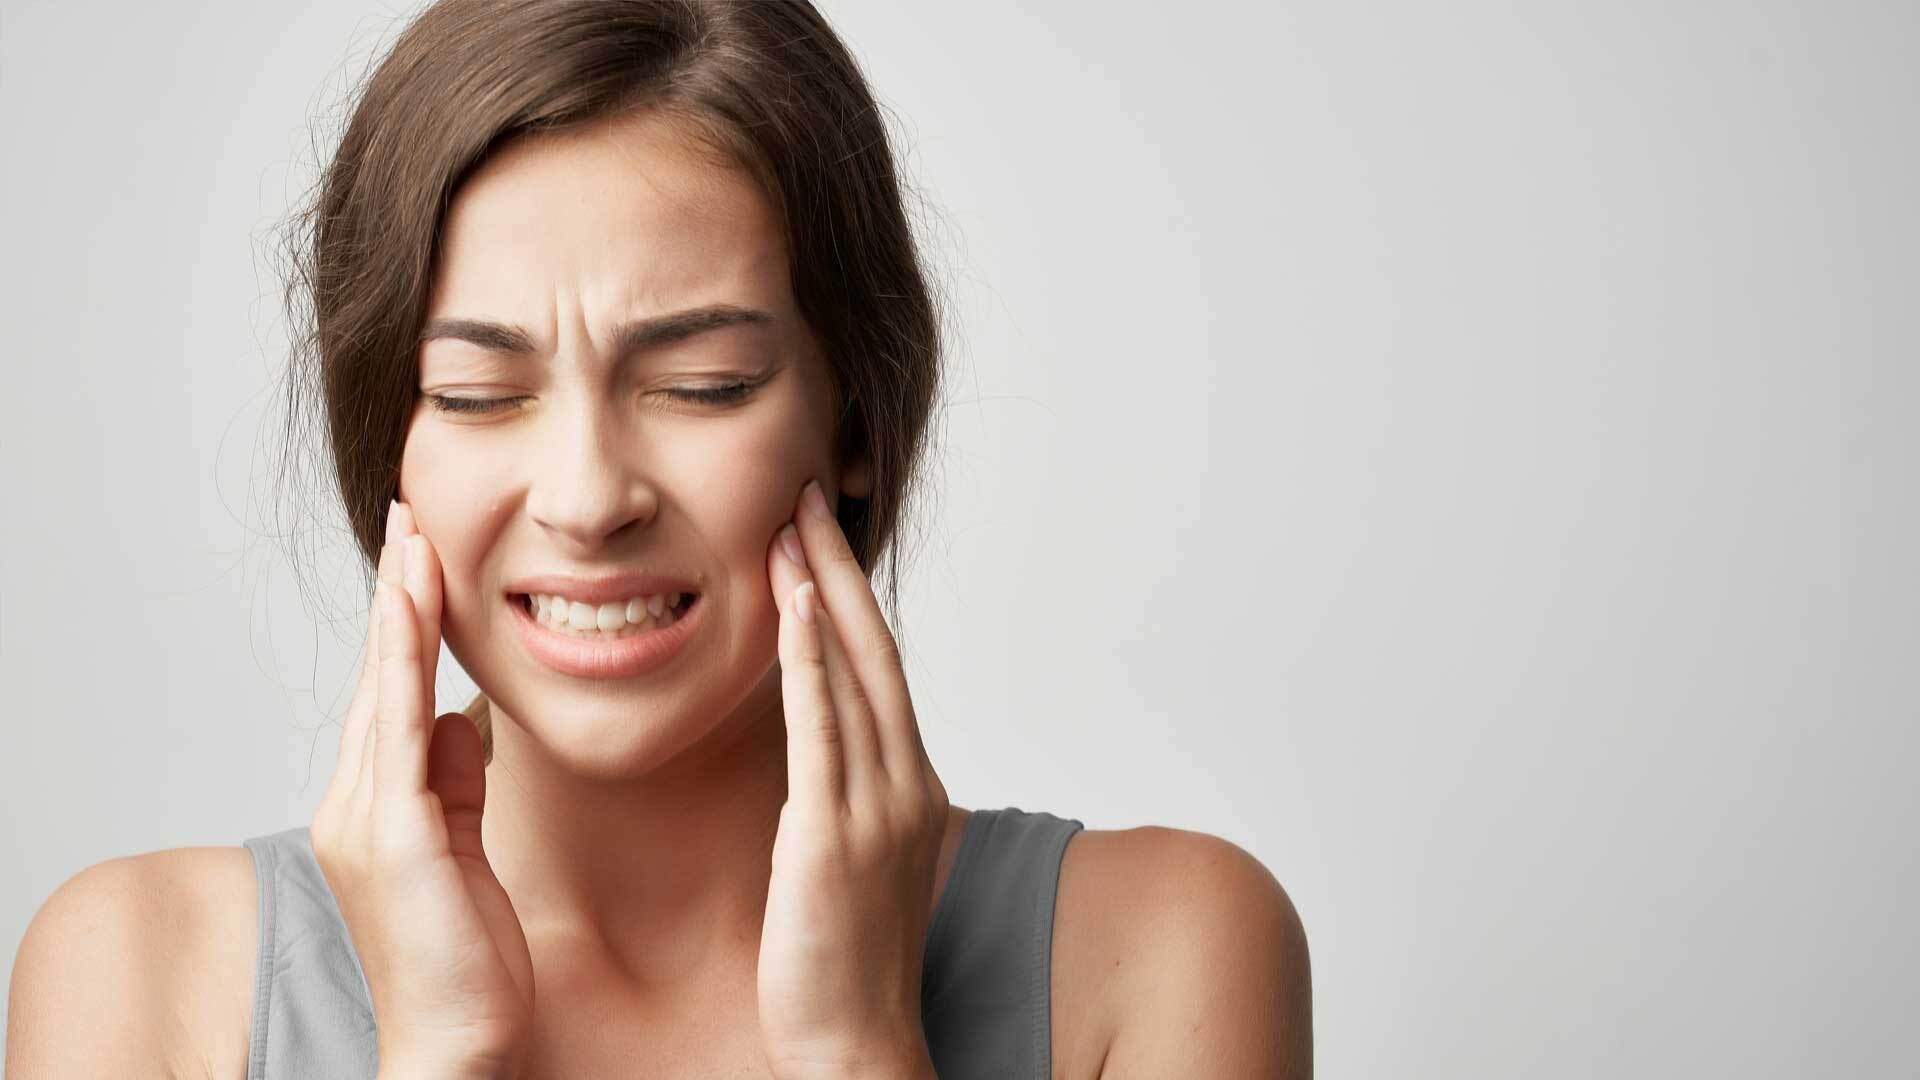 Jaw pain: What does it mean unilateral right or left?